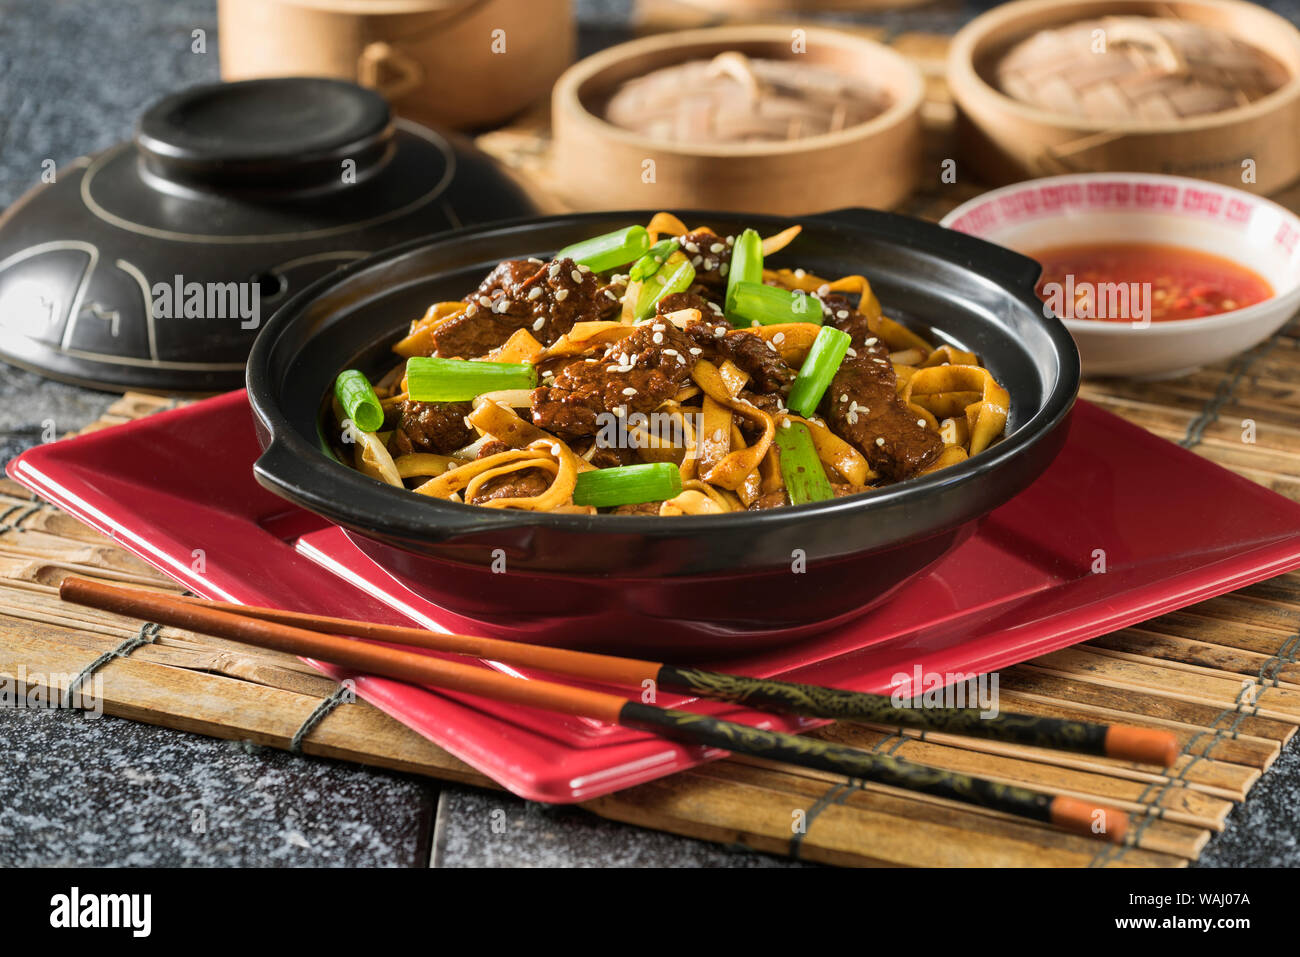 Beef chow fun. Cantonese noodle stir fry. Chinese Food Stock Photo